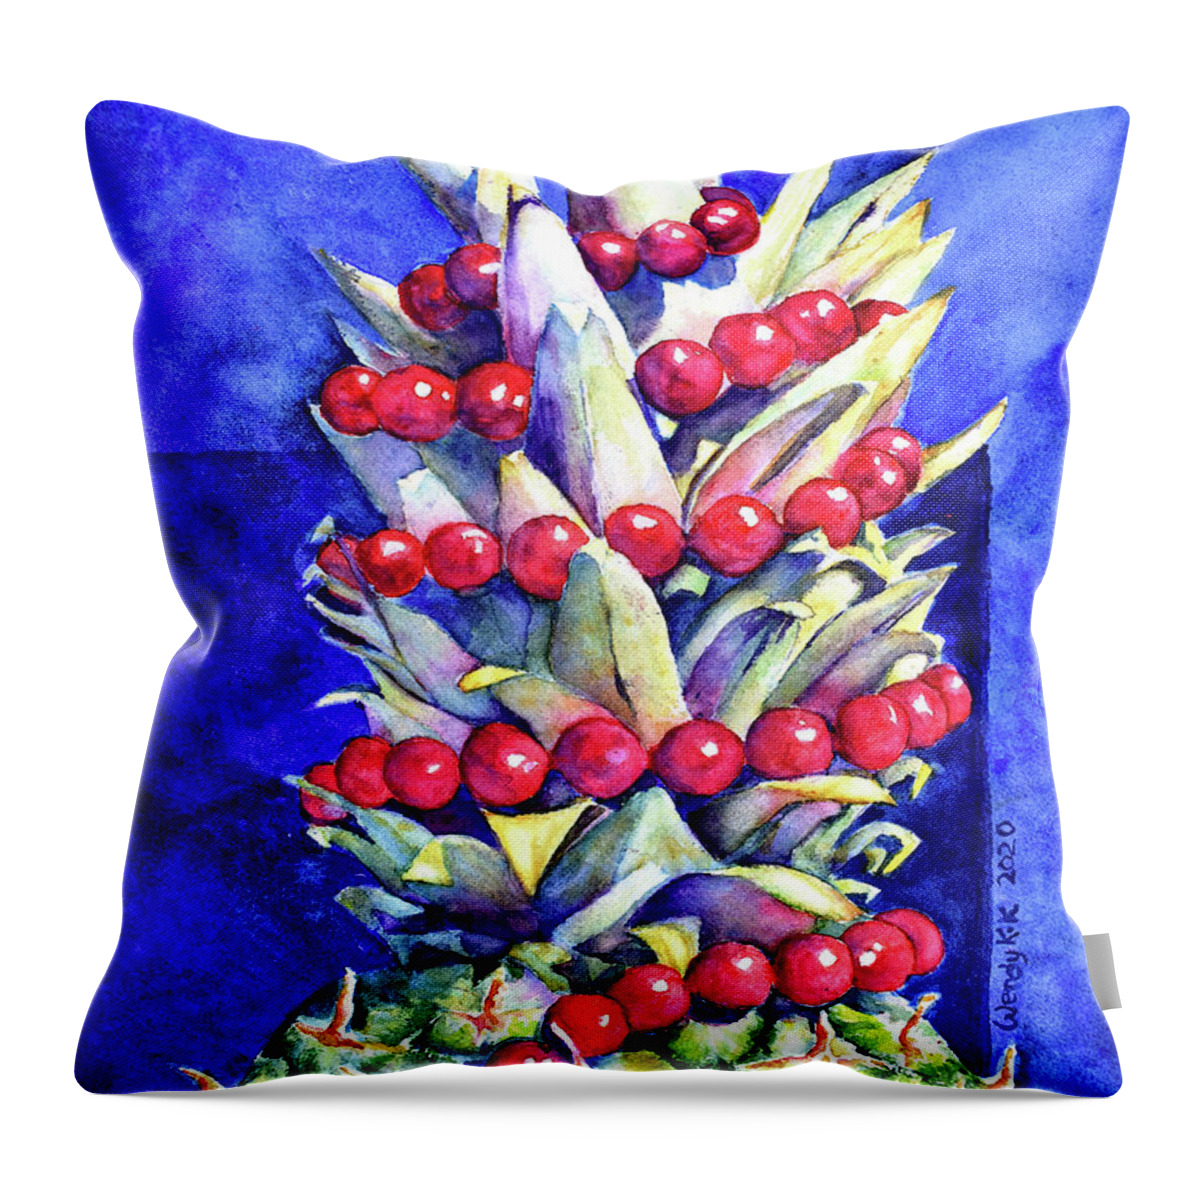 Fruit Throw Pillow featuring the painting Party Pineapple by Wendy Keeney-Kennicutt